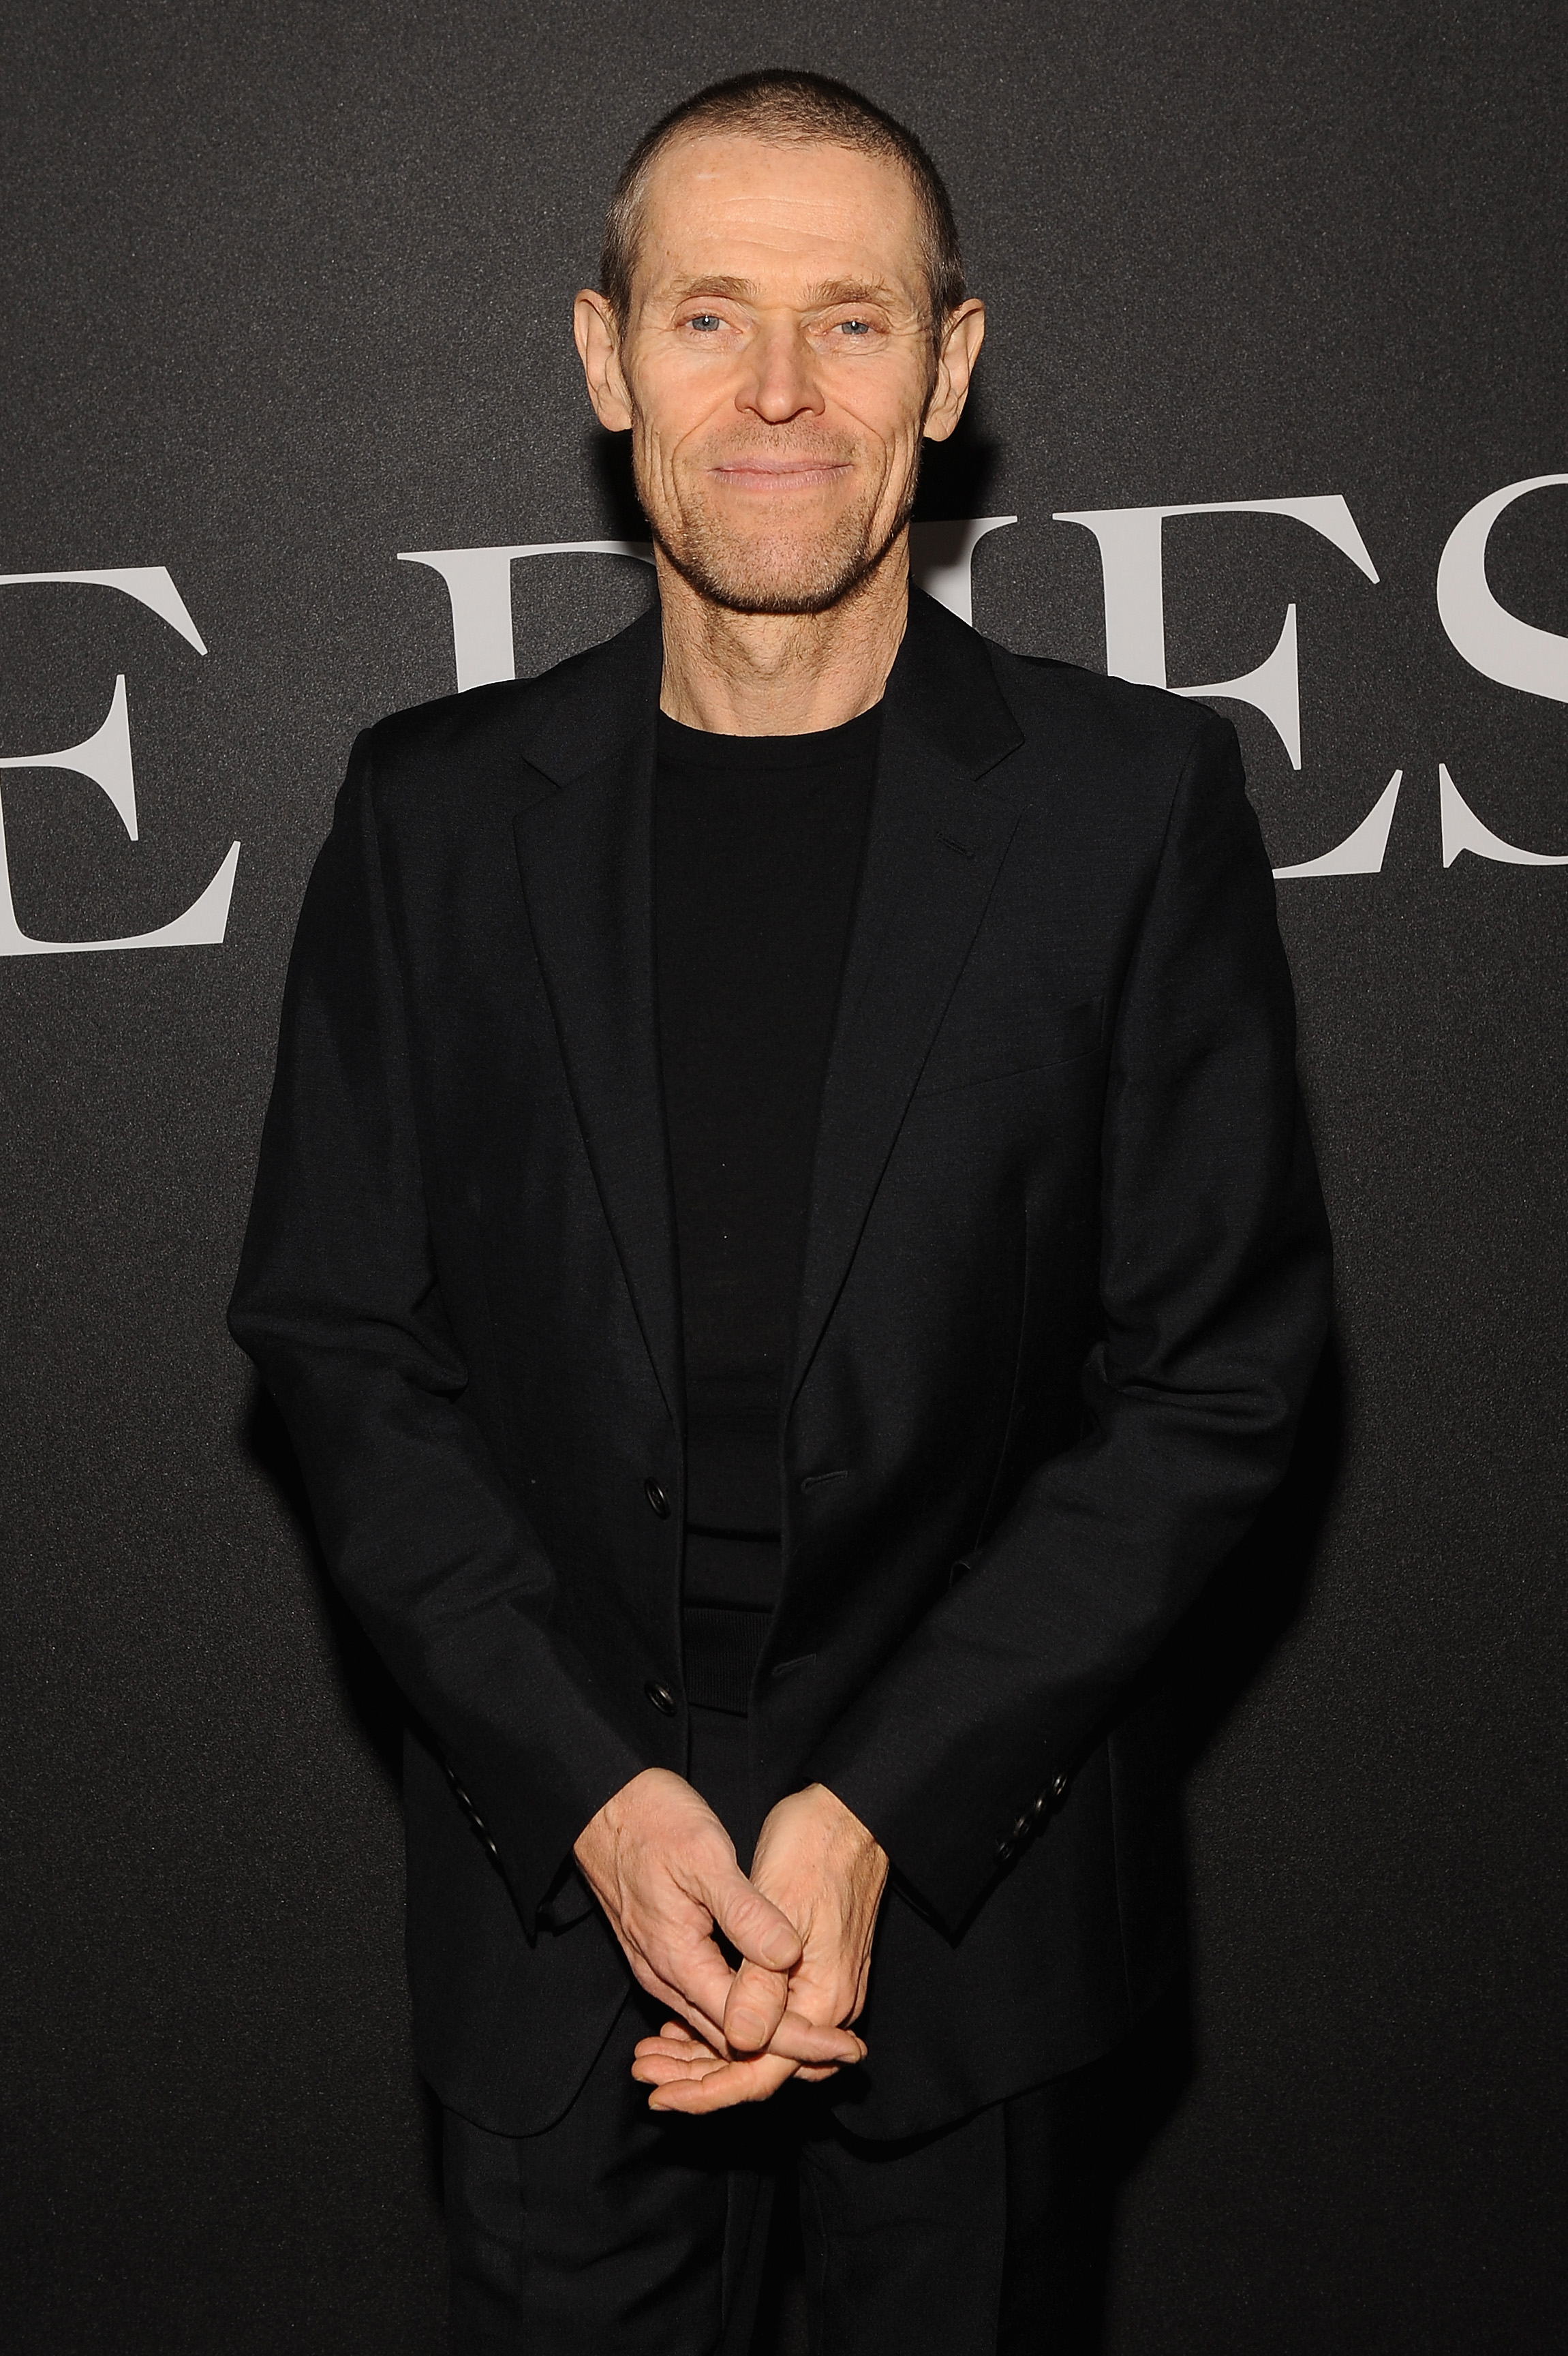 Willem Dafoe attends the Miu Miu Women's Tales 9th Edition "De Djess" screening on February 18, 2015 in New York City. | Source: Getty Images